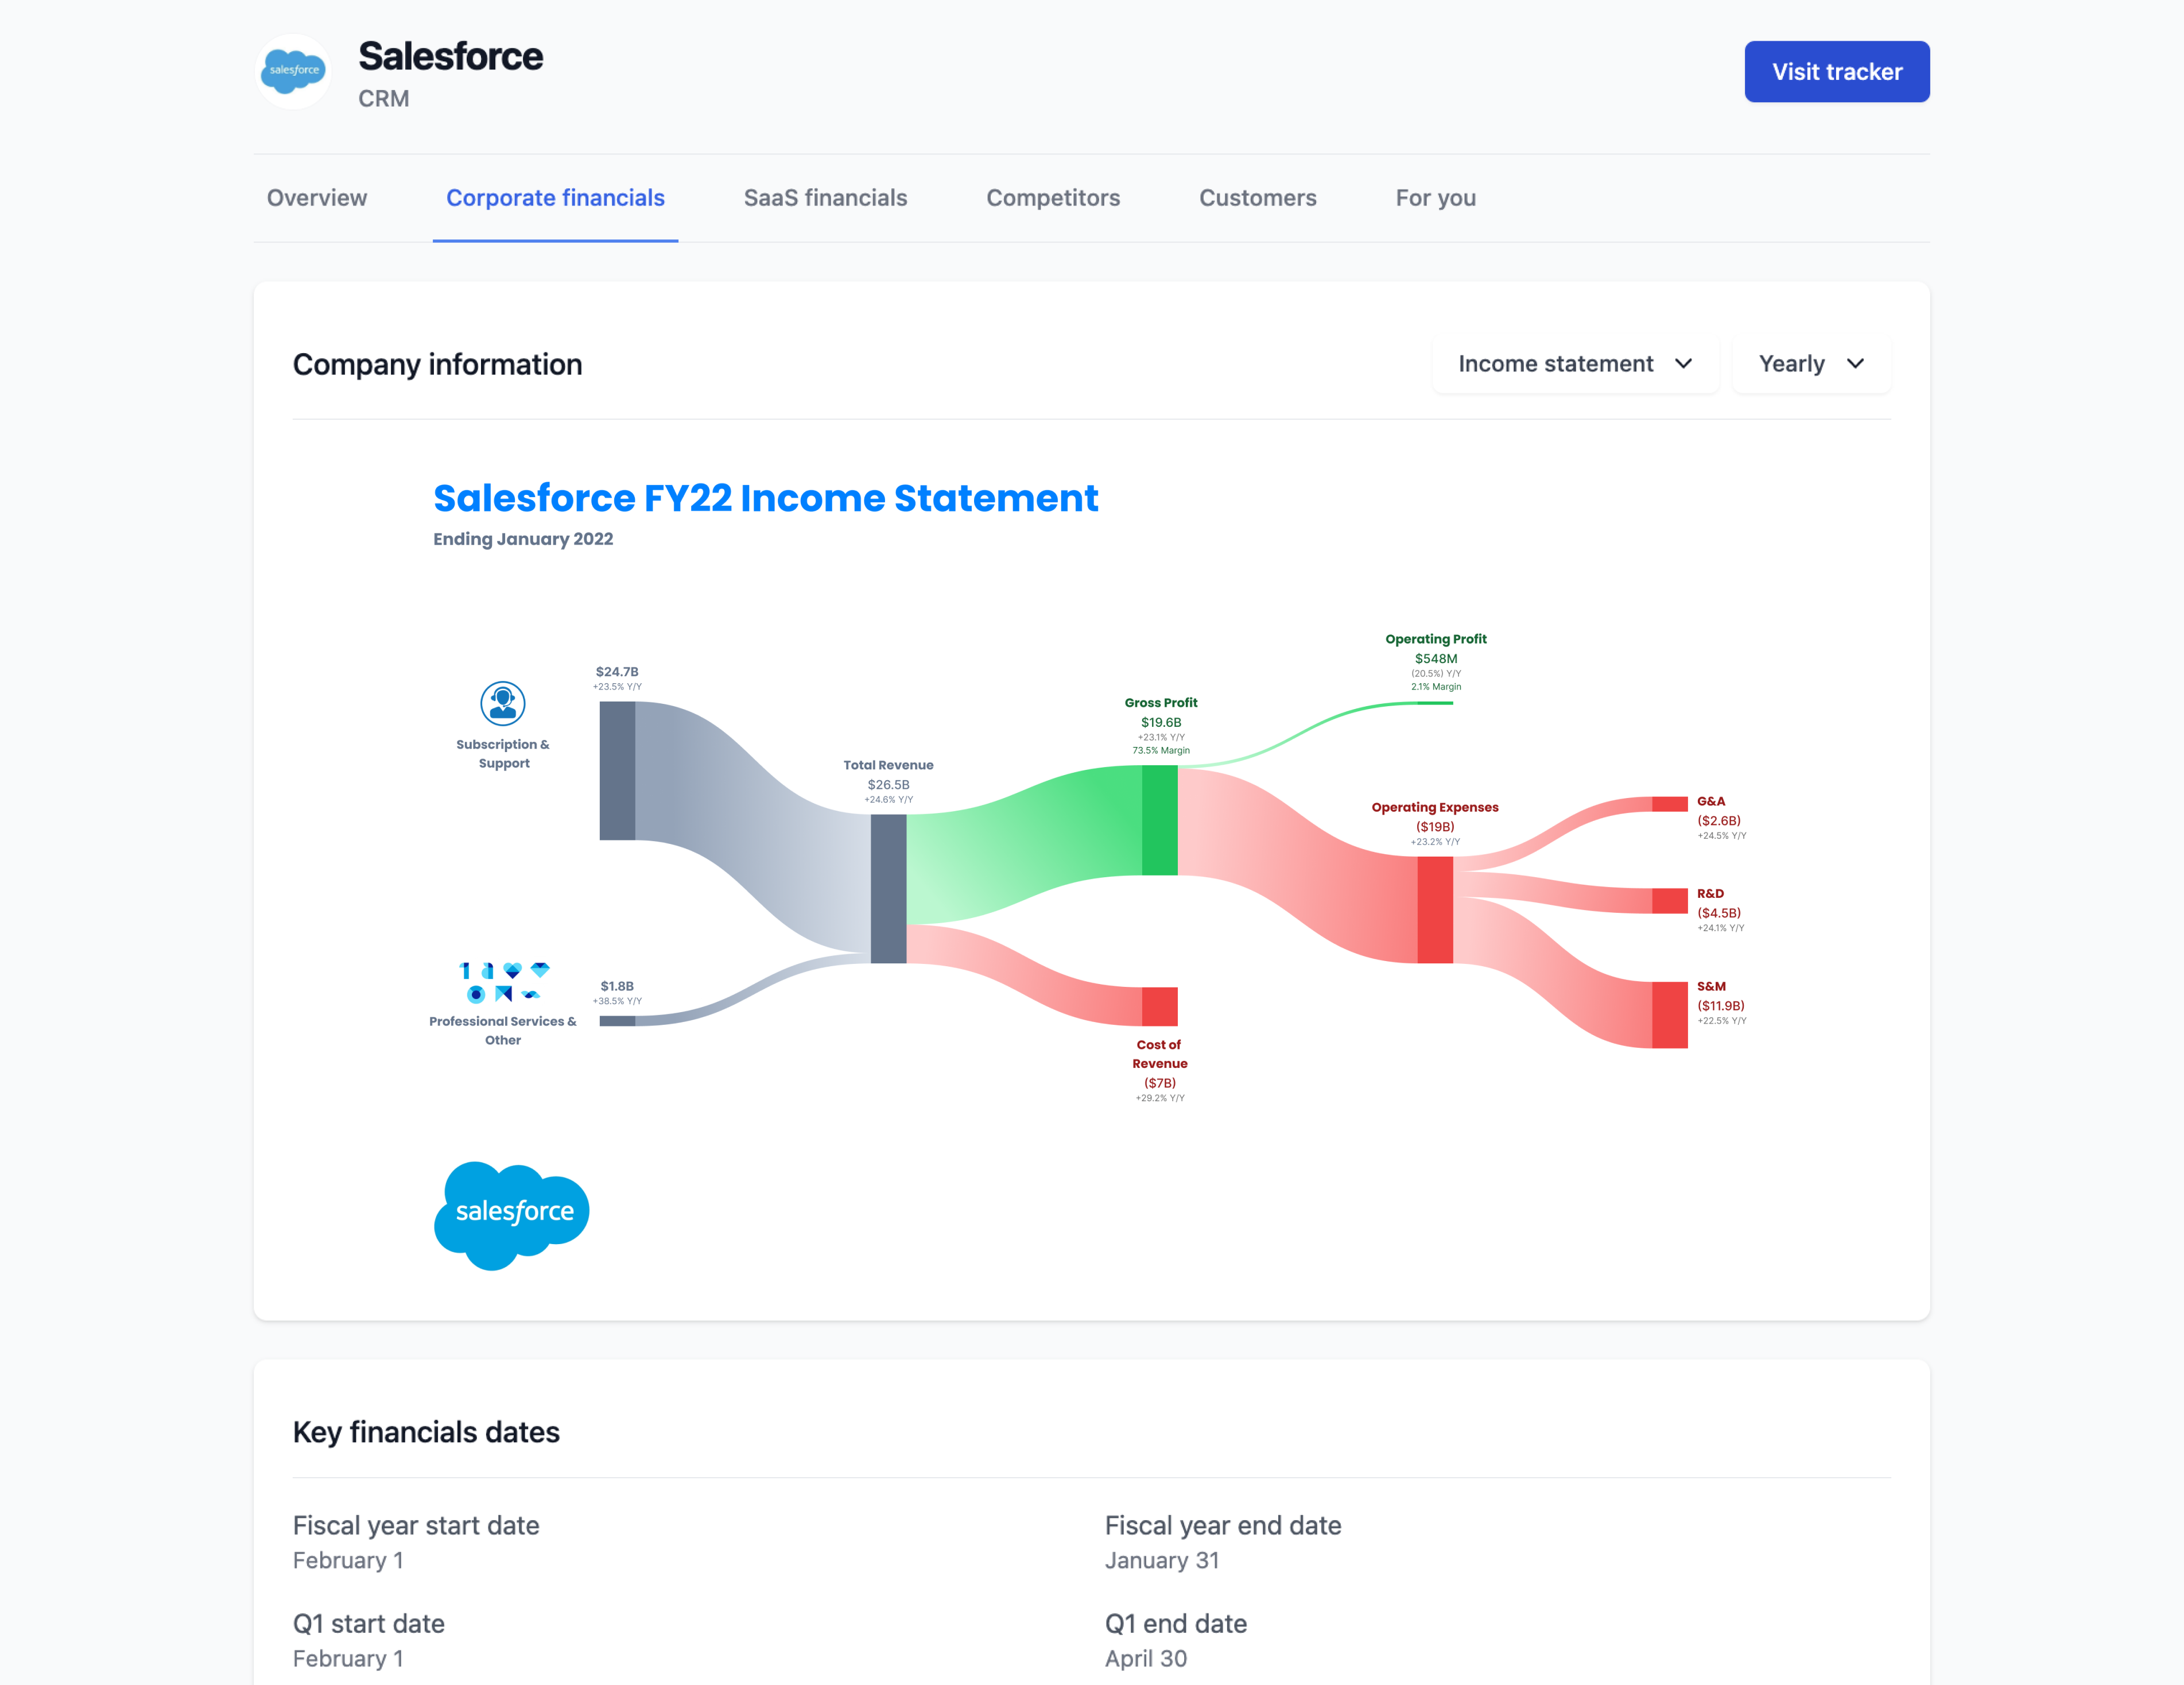 Negotiation guide for Salesforce: Sankey diagram revenue streams. SaaS financials and competitor insights for negotiations.